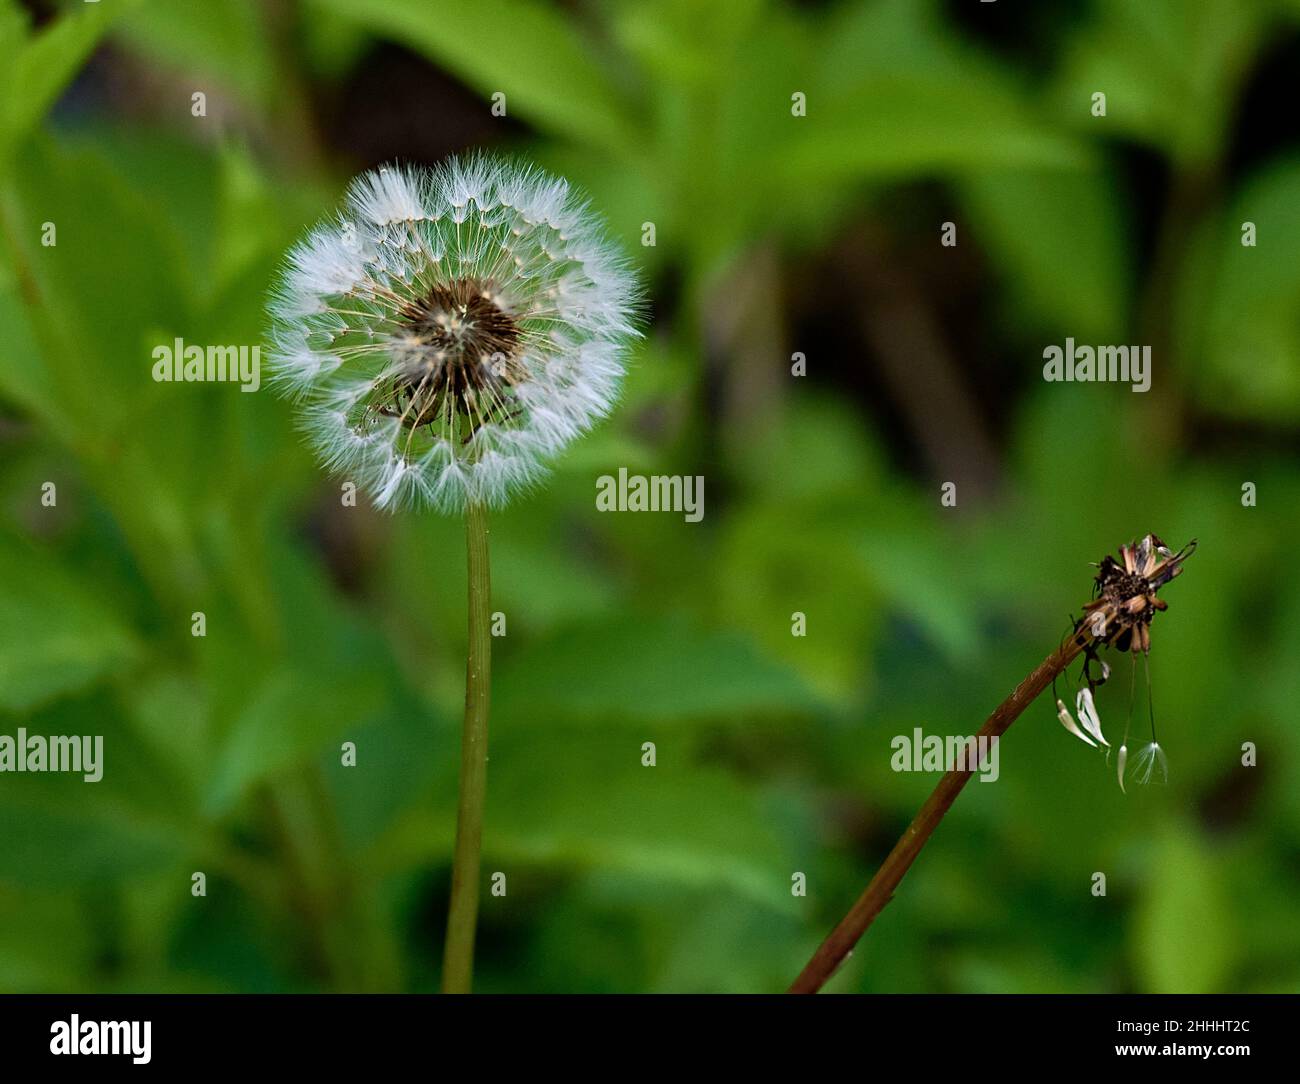 Closeup of a whole delicate Dandelion and one thats gone and only the stem is left. With a green background. Stock Photo